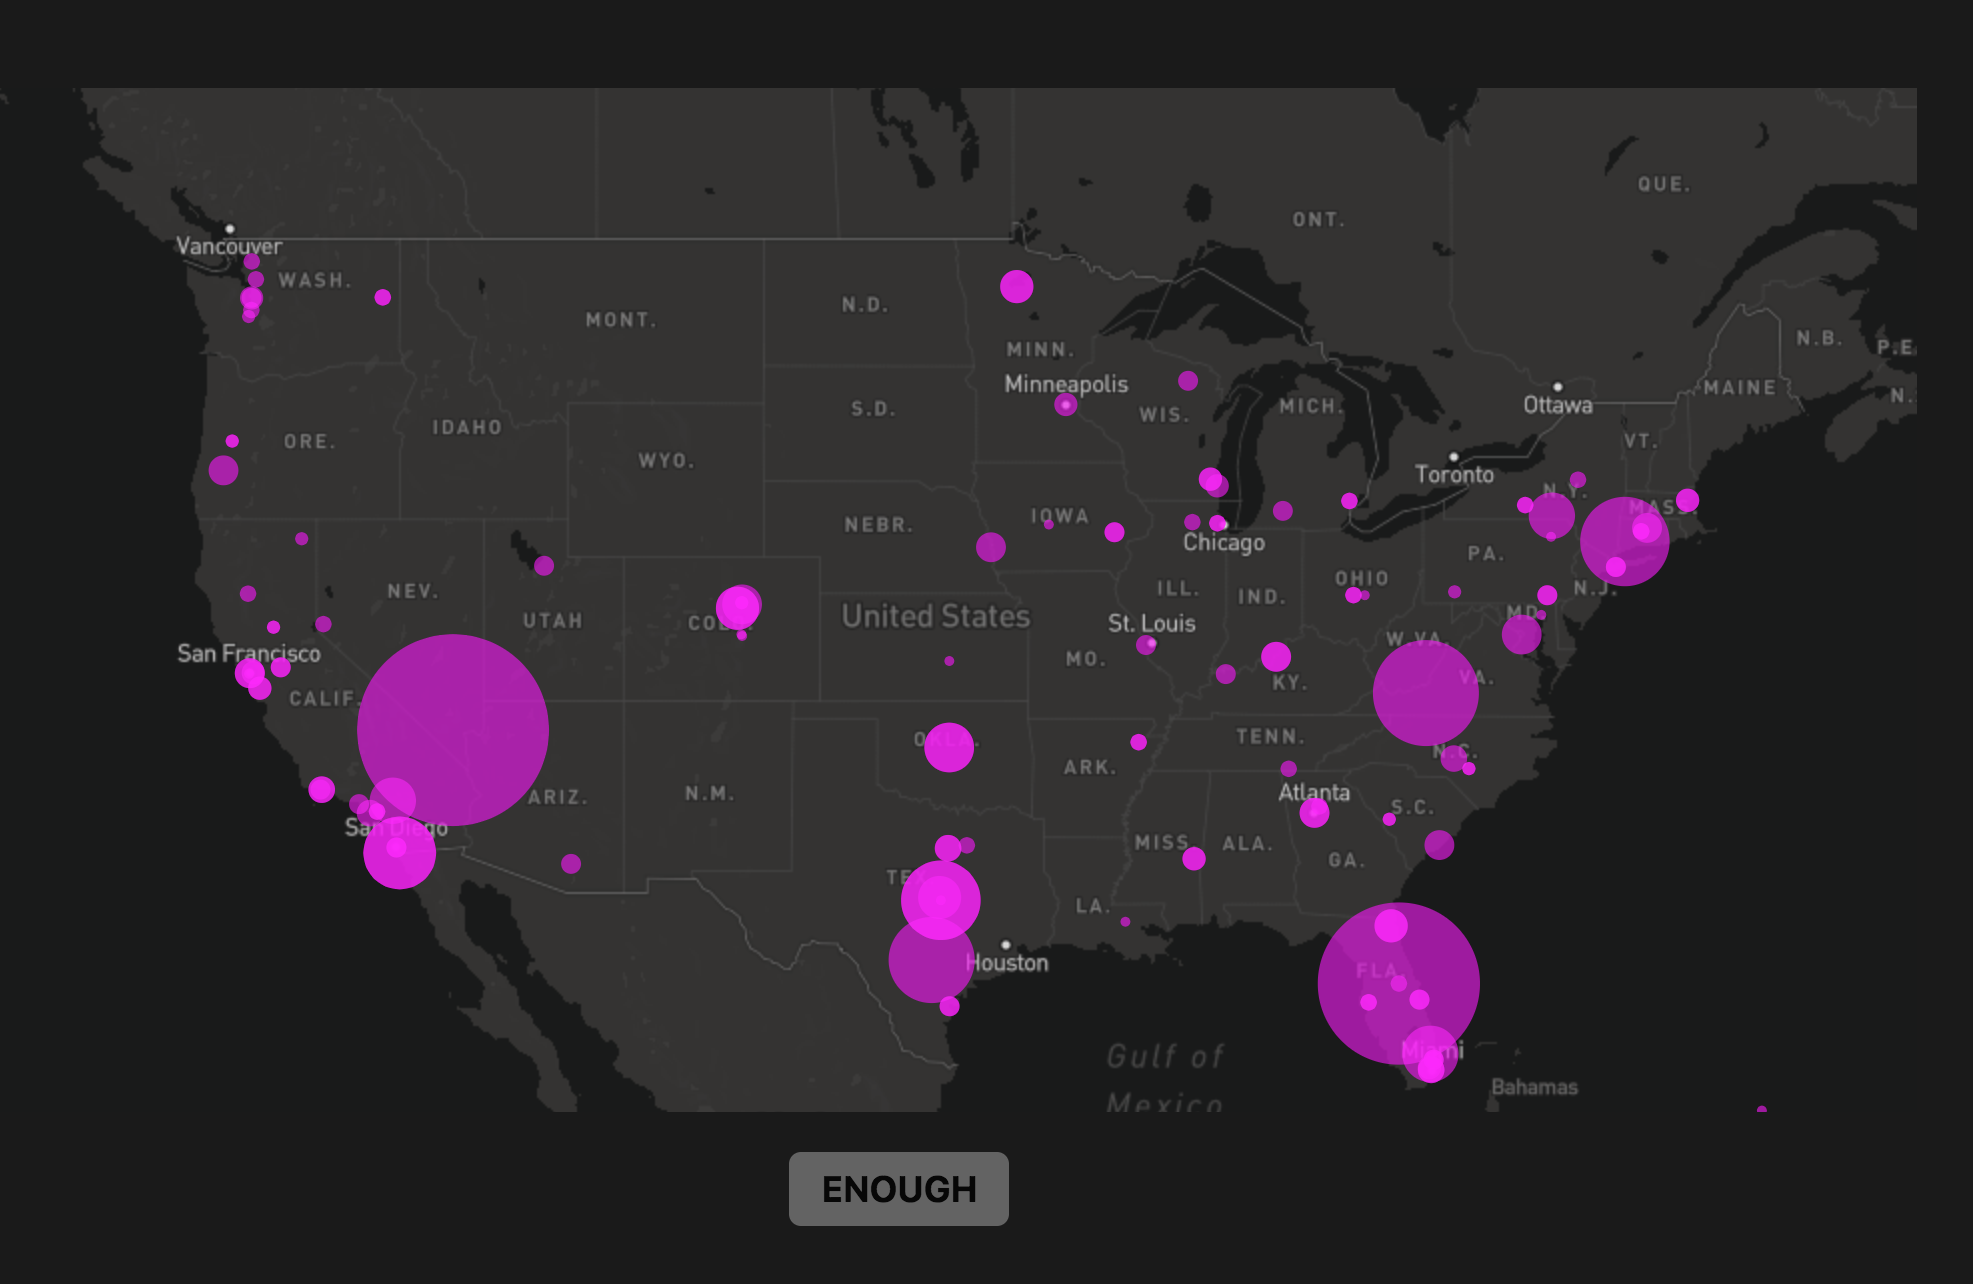 An Interactive Musical Timeline of Mass Shootings in the U.S. since 1982